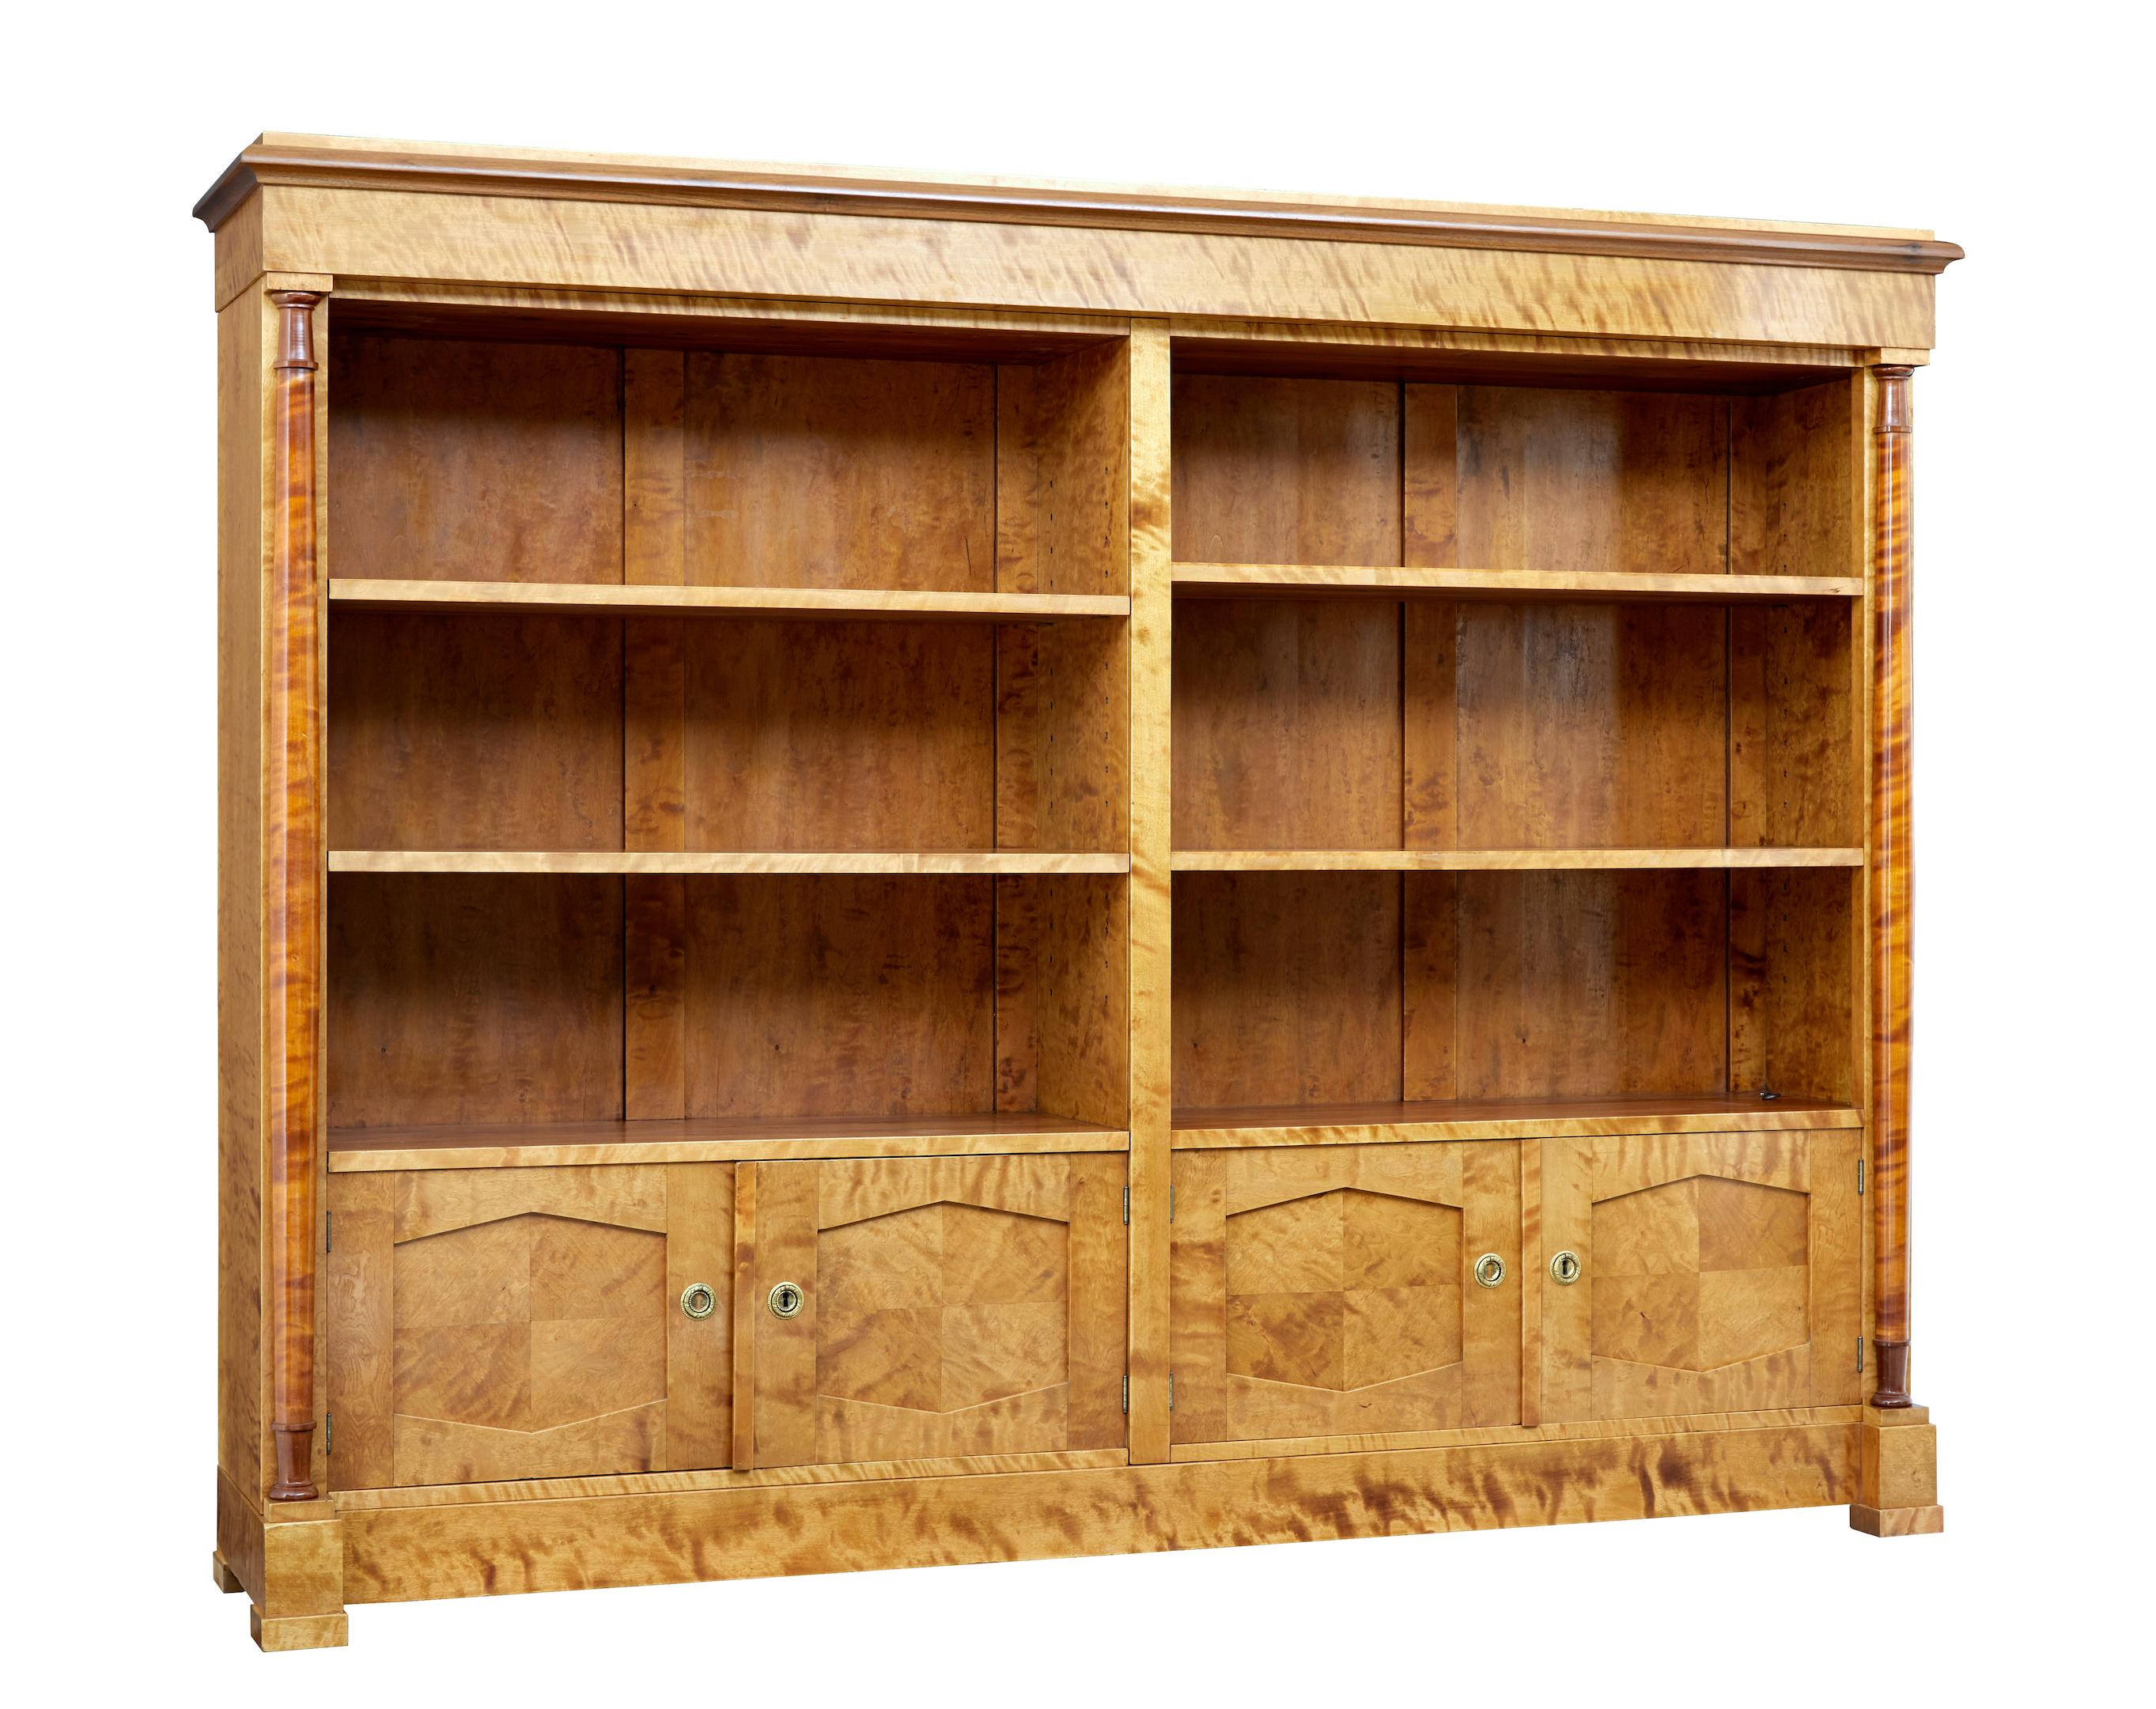 Impressive Art Deco period bookcase of large proportions, circa 1930.

Made with burr birch veneers. Shaped cornice stands above an open bookcase section with central partition. Each side with 2 adjustable shelves. Below are 2 double door